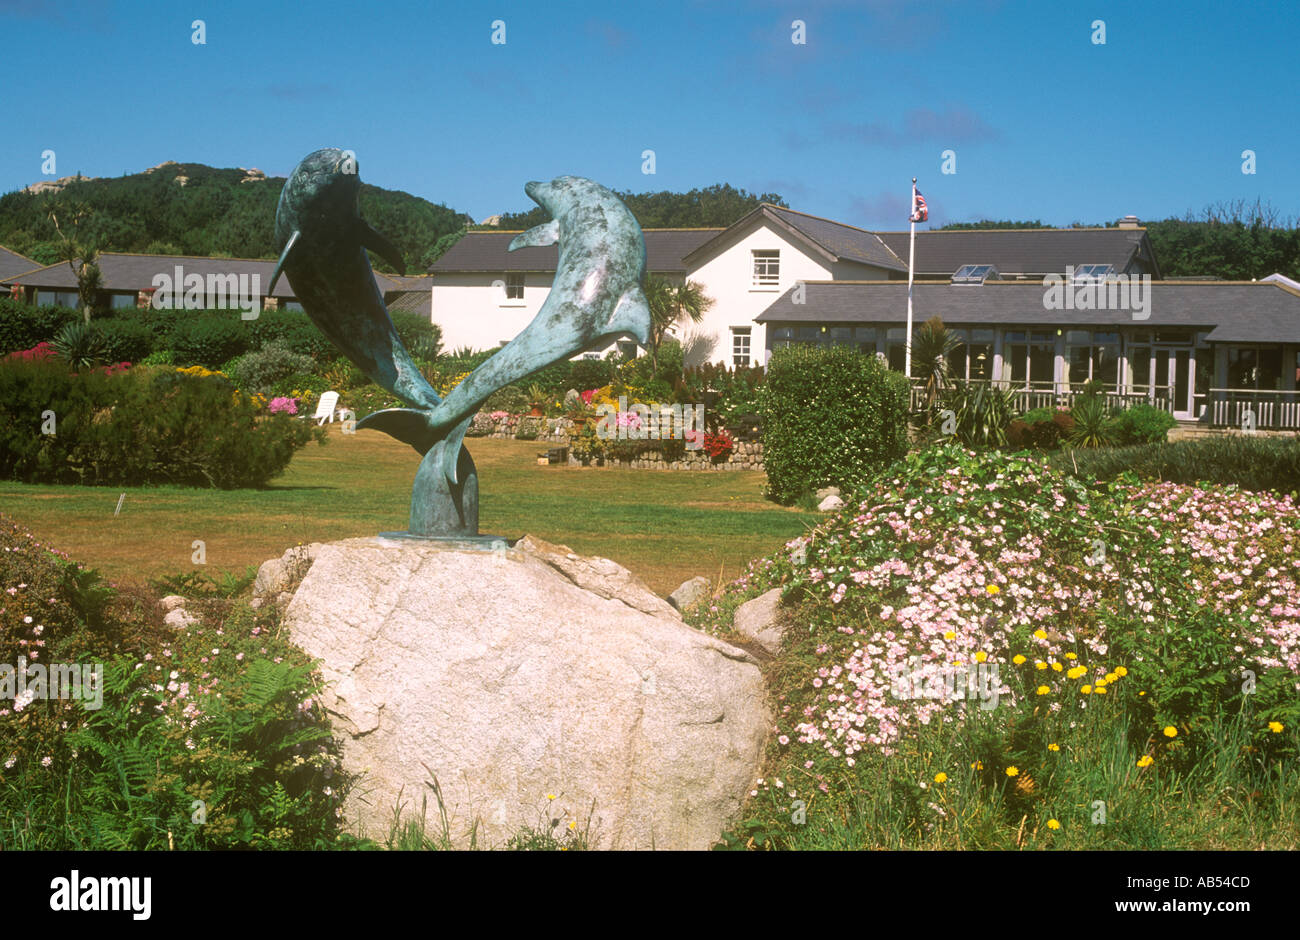 Sculpture in the grounds of The Island Hotel at Old Grimsby on the island of Tresco Isles of Scilly Cornwall United Kingdom Stock Photo